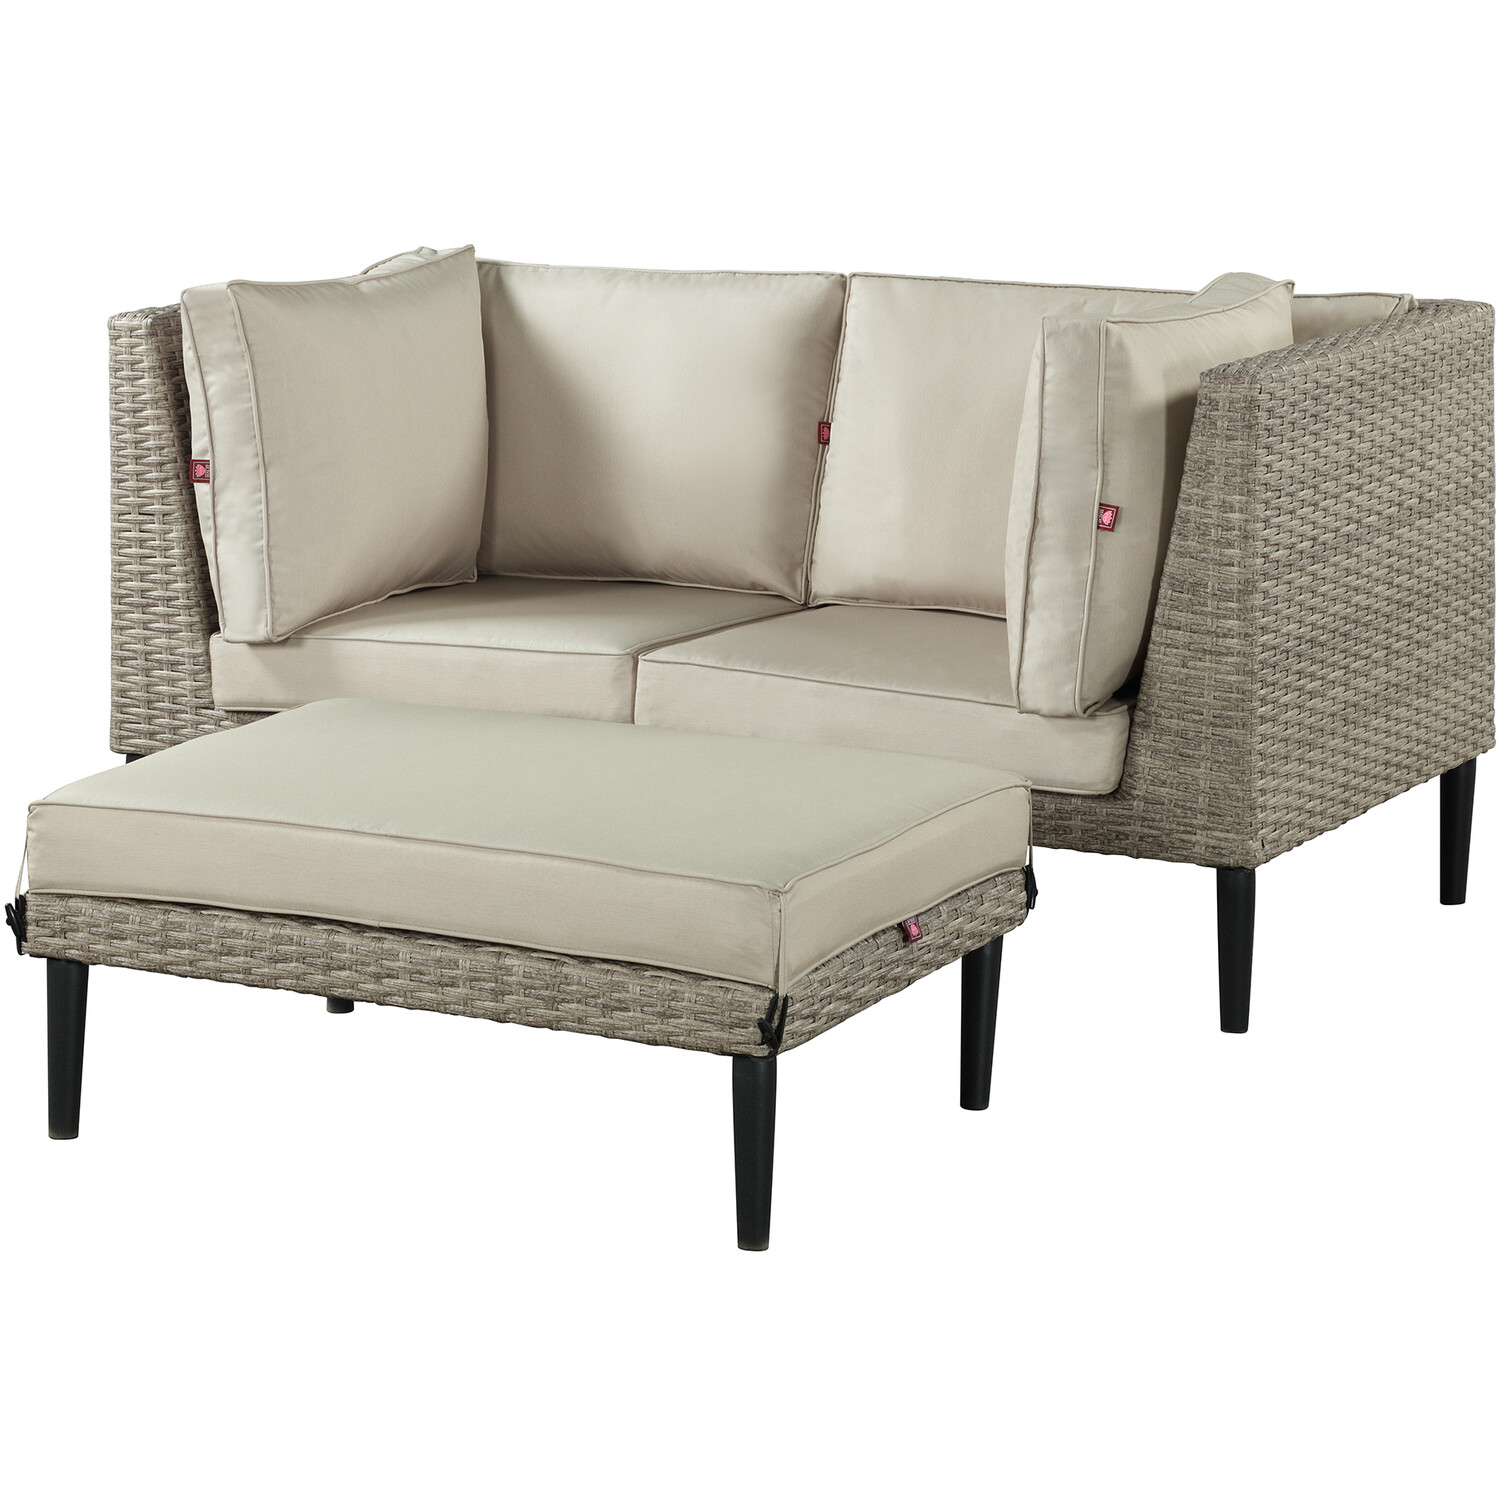 Malay Clydesdale 6 Seater Modular Sectional Corner Lounge Set Image 3